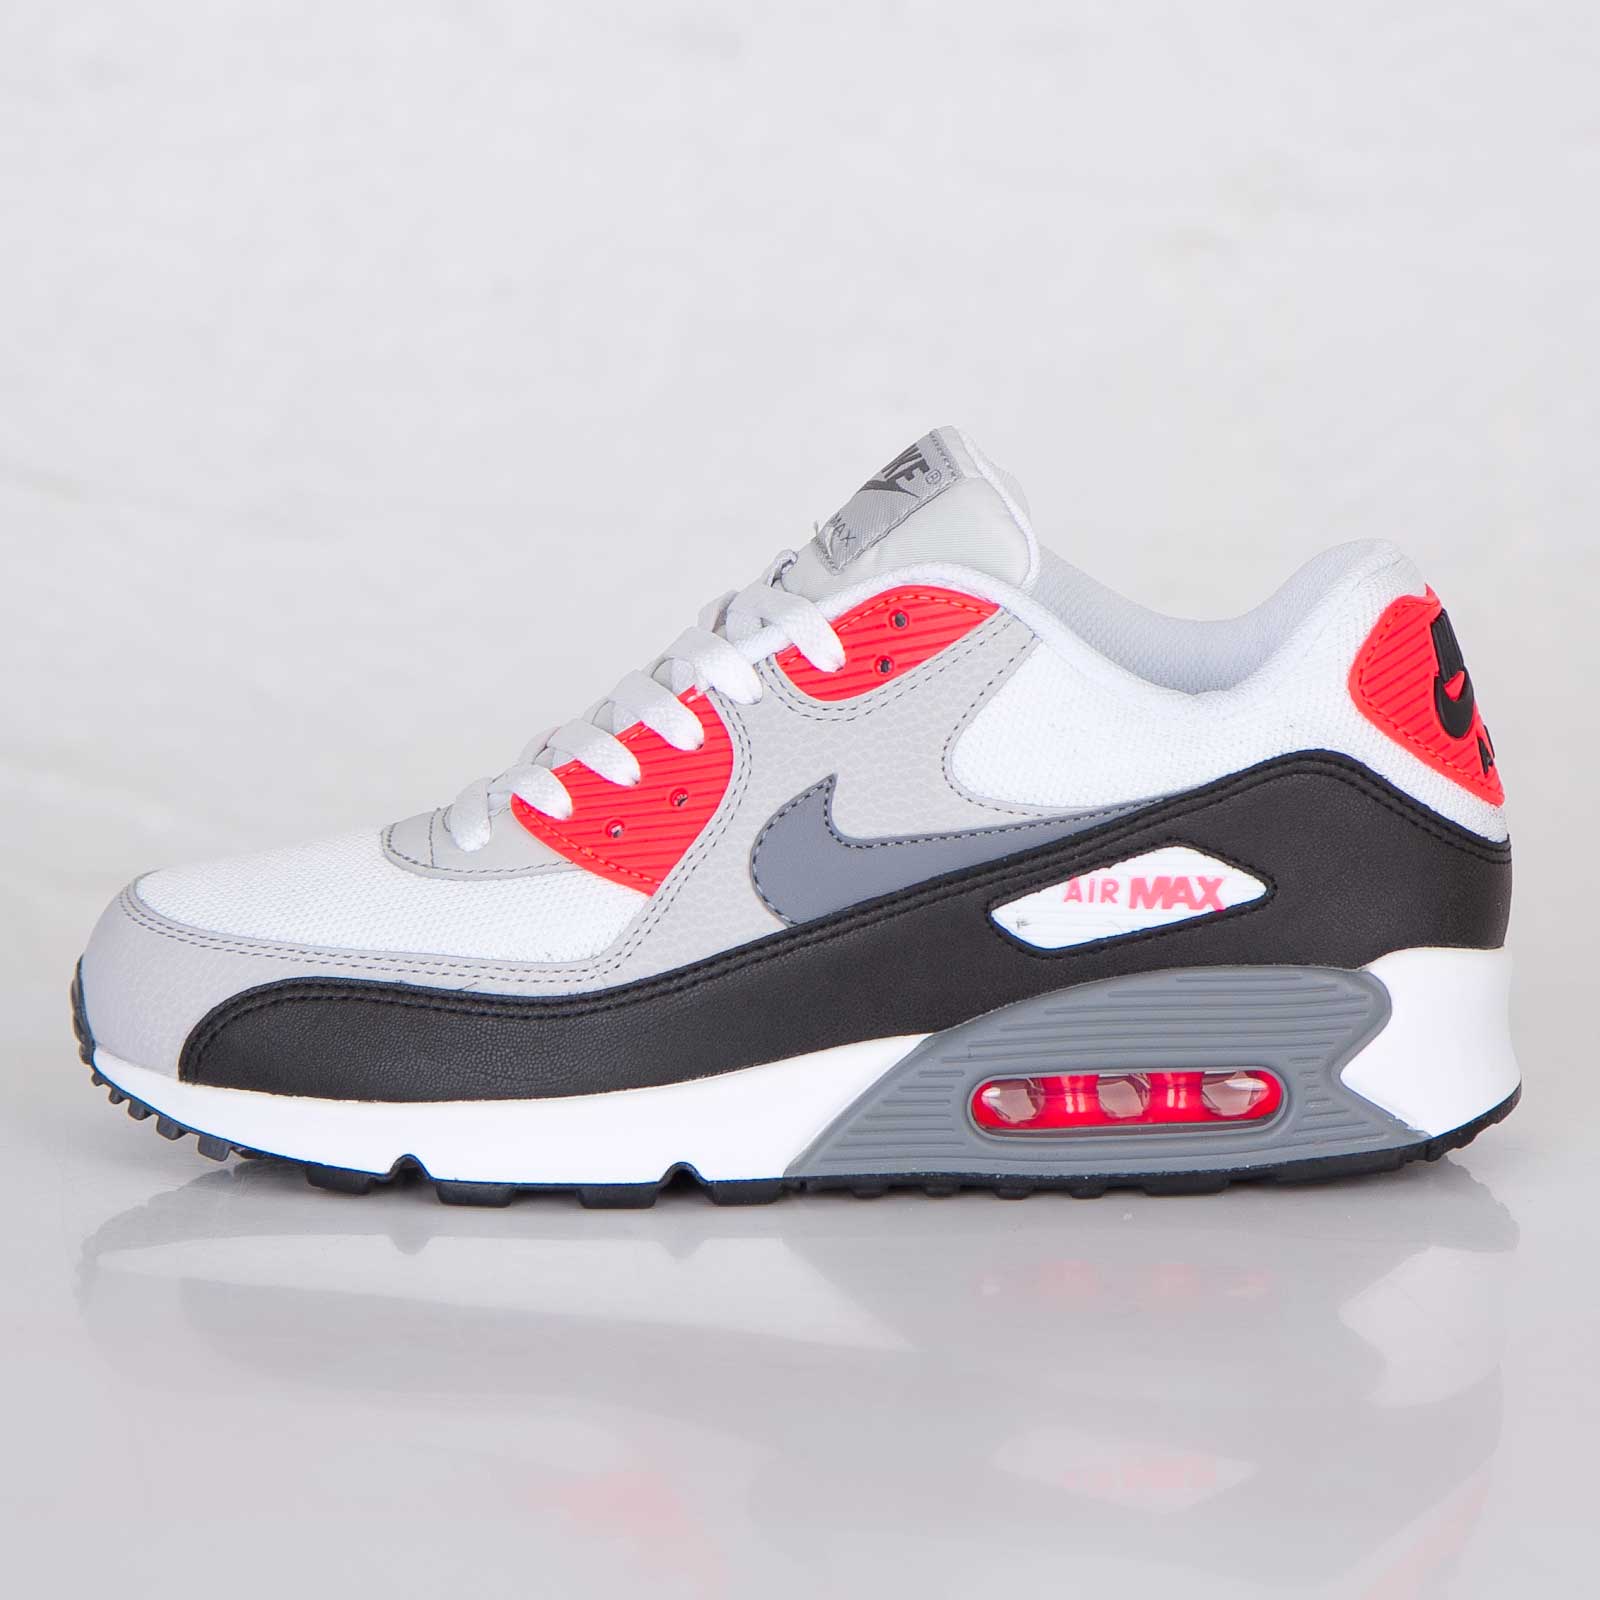 air max 90 red white grey